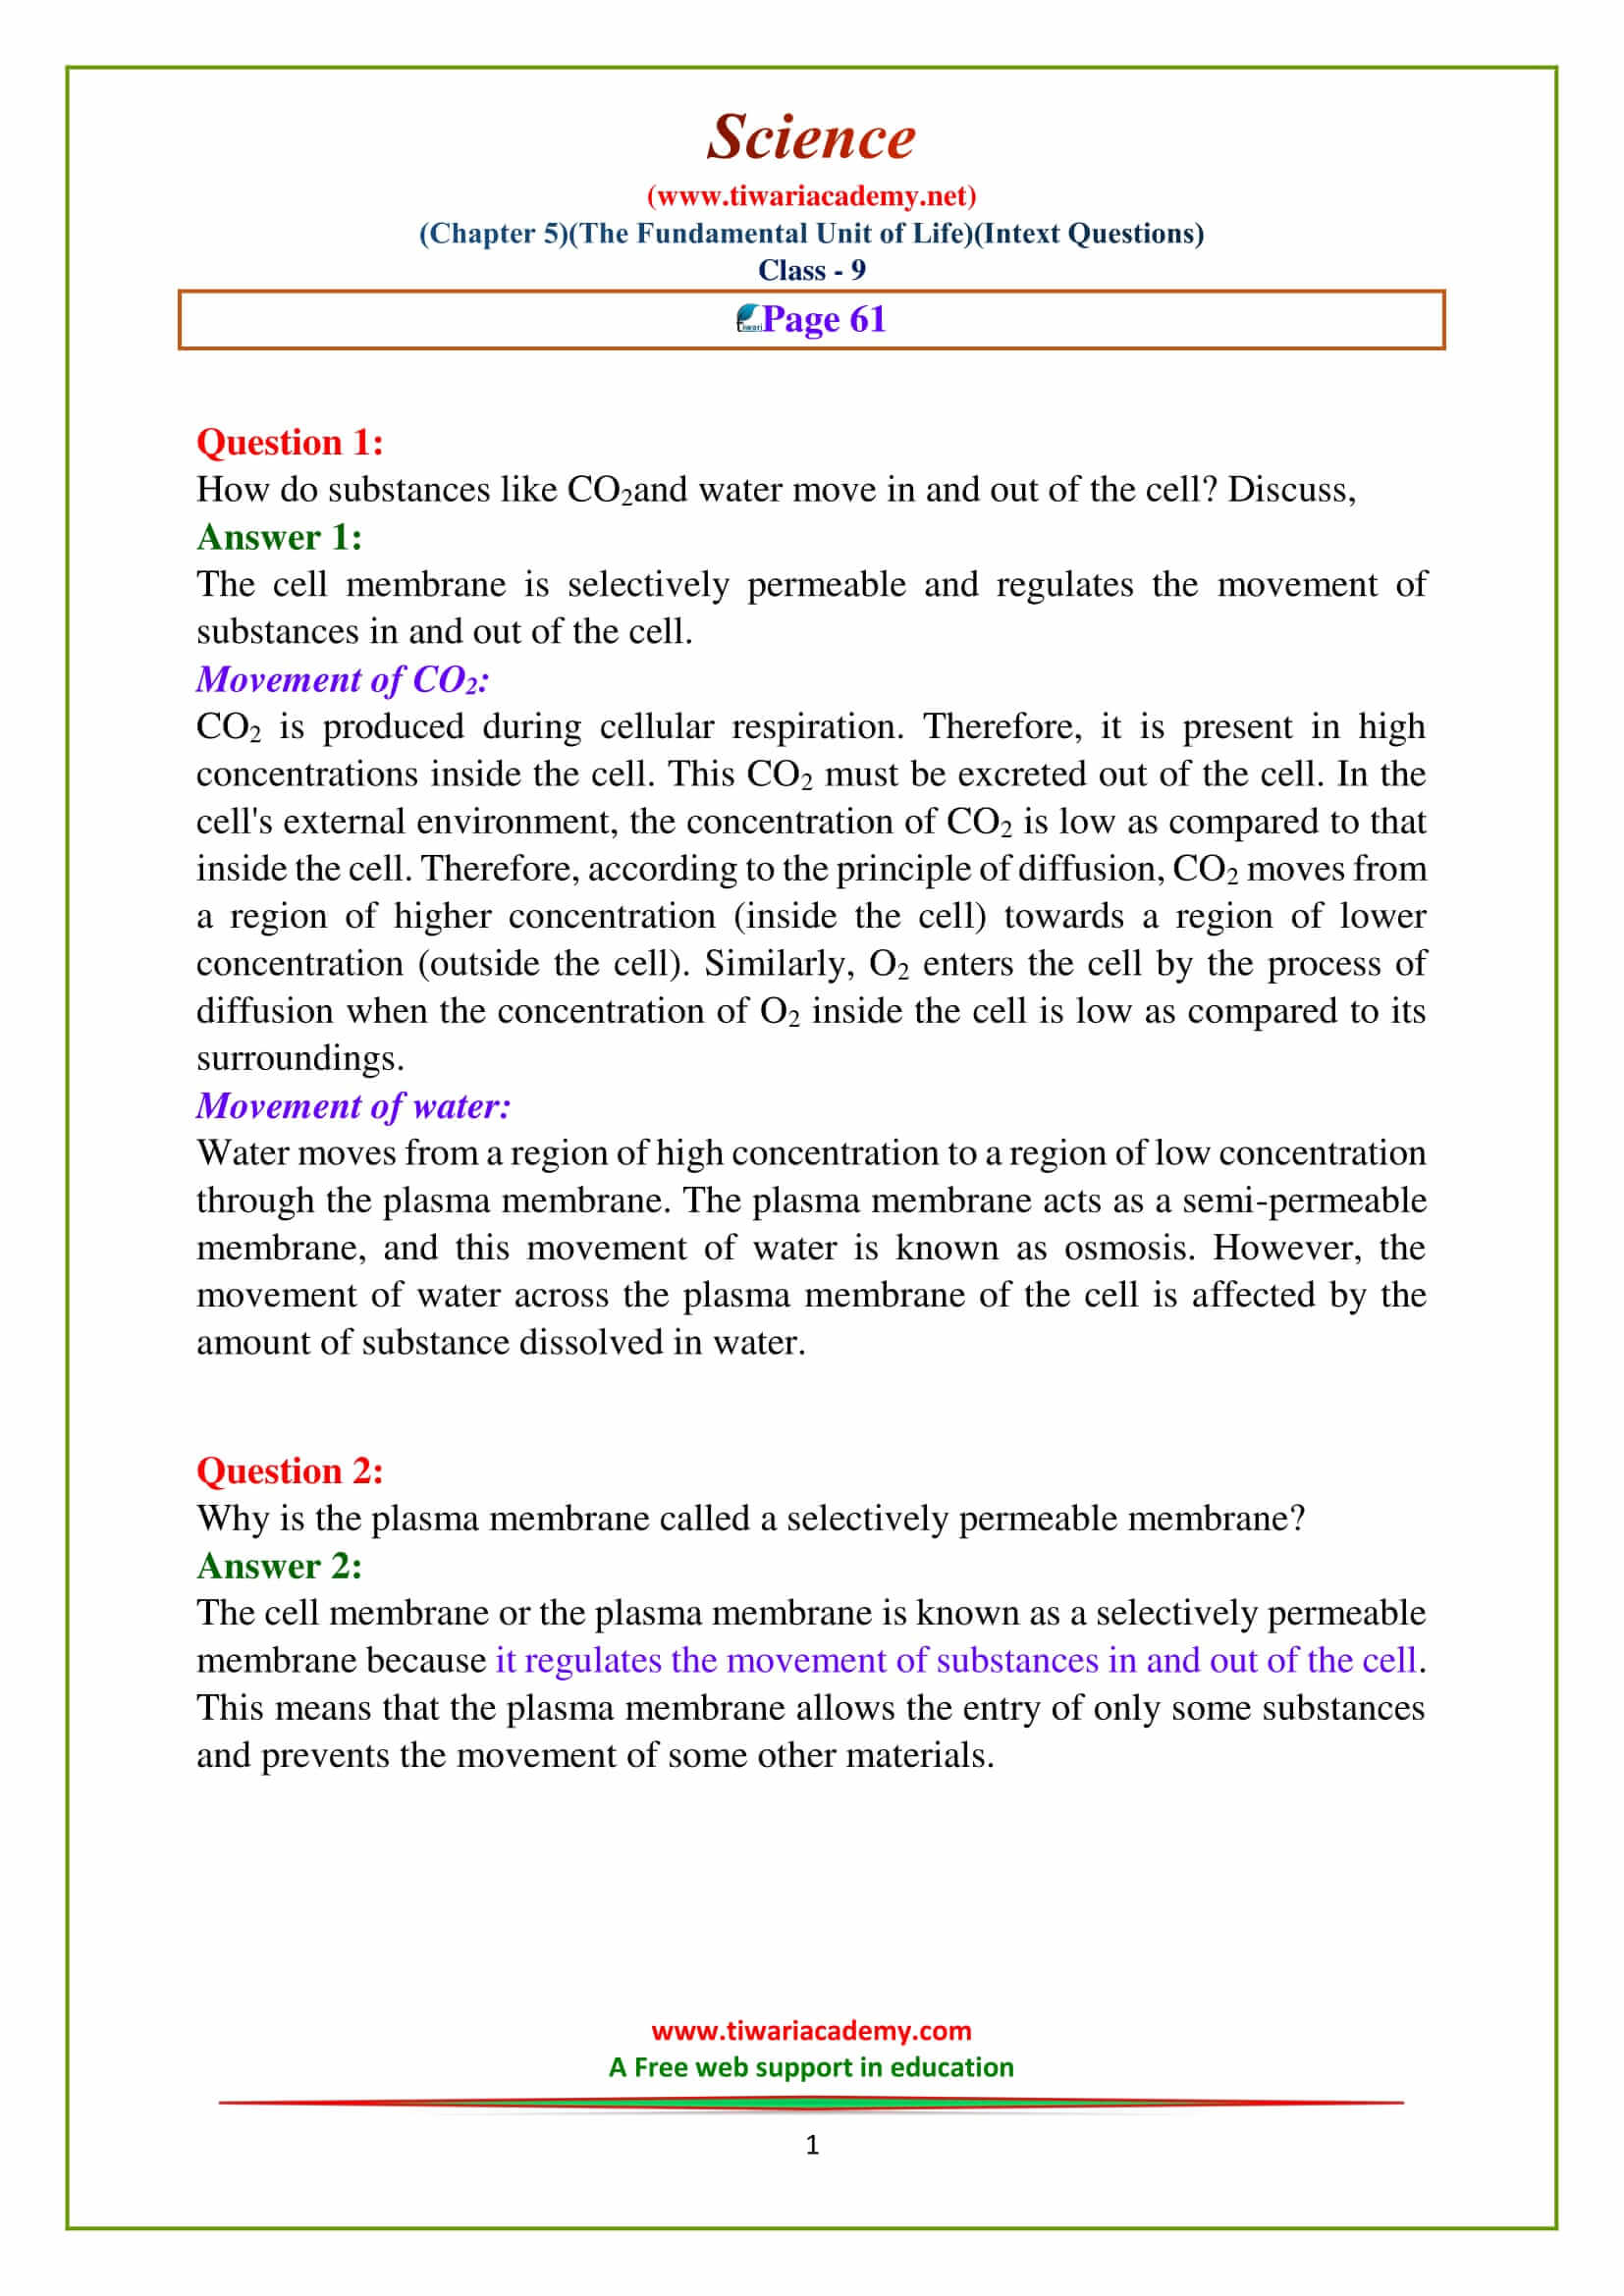 9 Science Chapter 5 The fundamental unit of life Intext questions of page 61